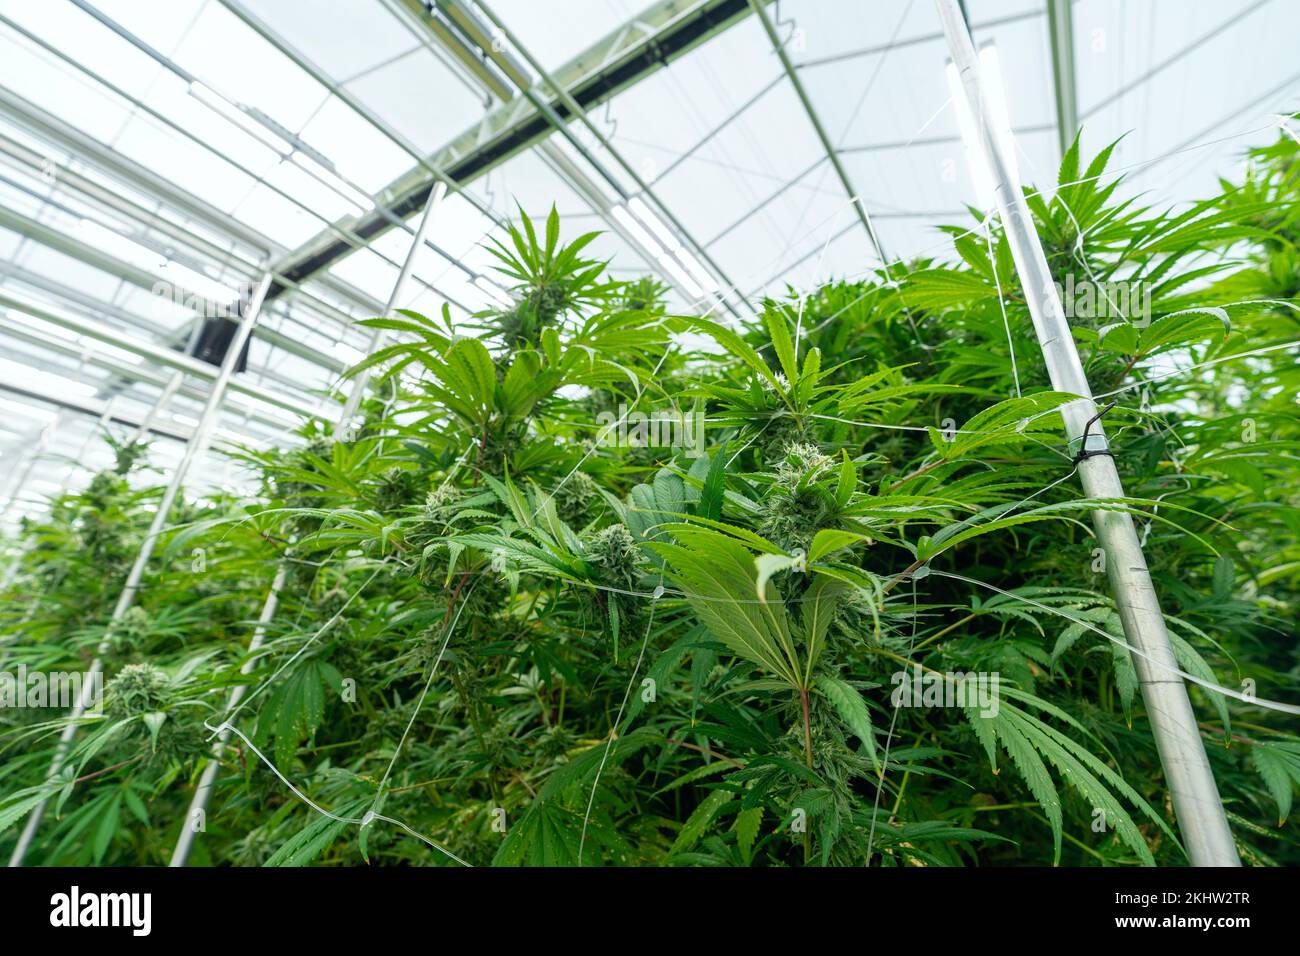 Mature legal cannabis plants ready for harvest Stock Photo